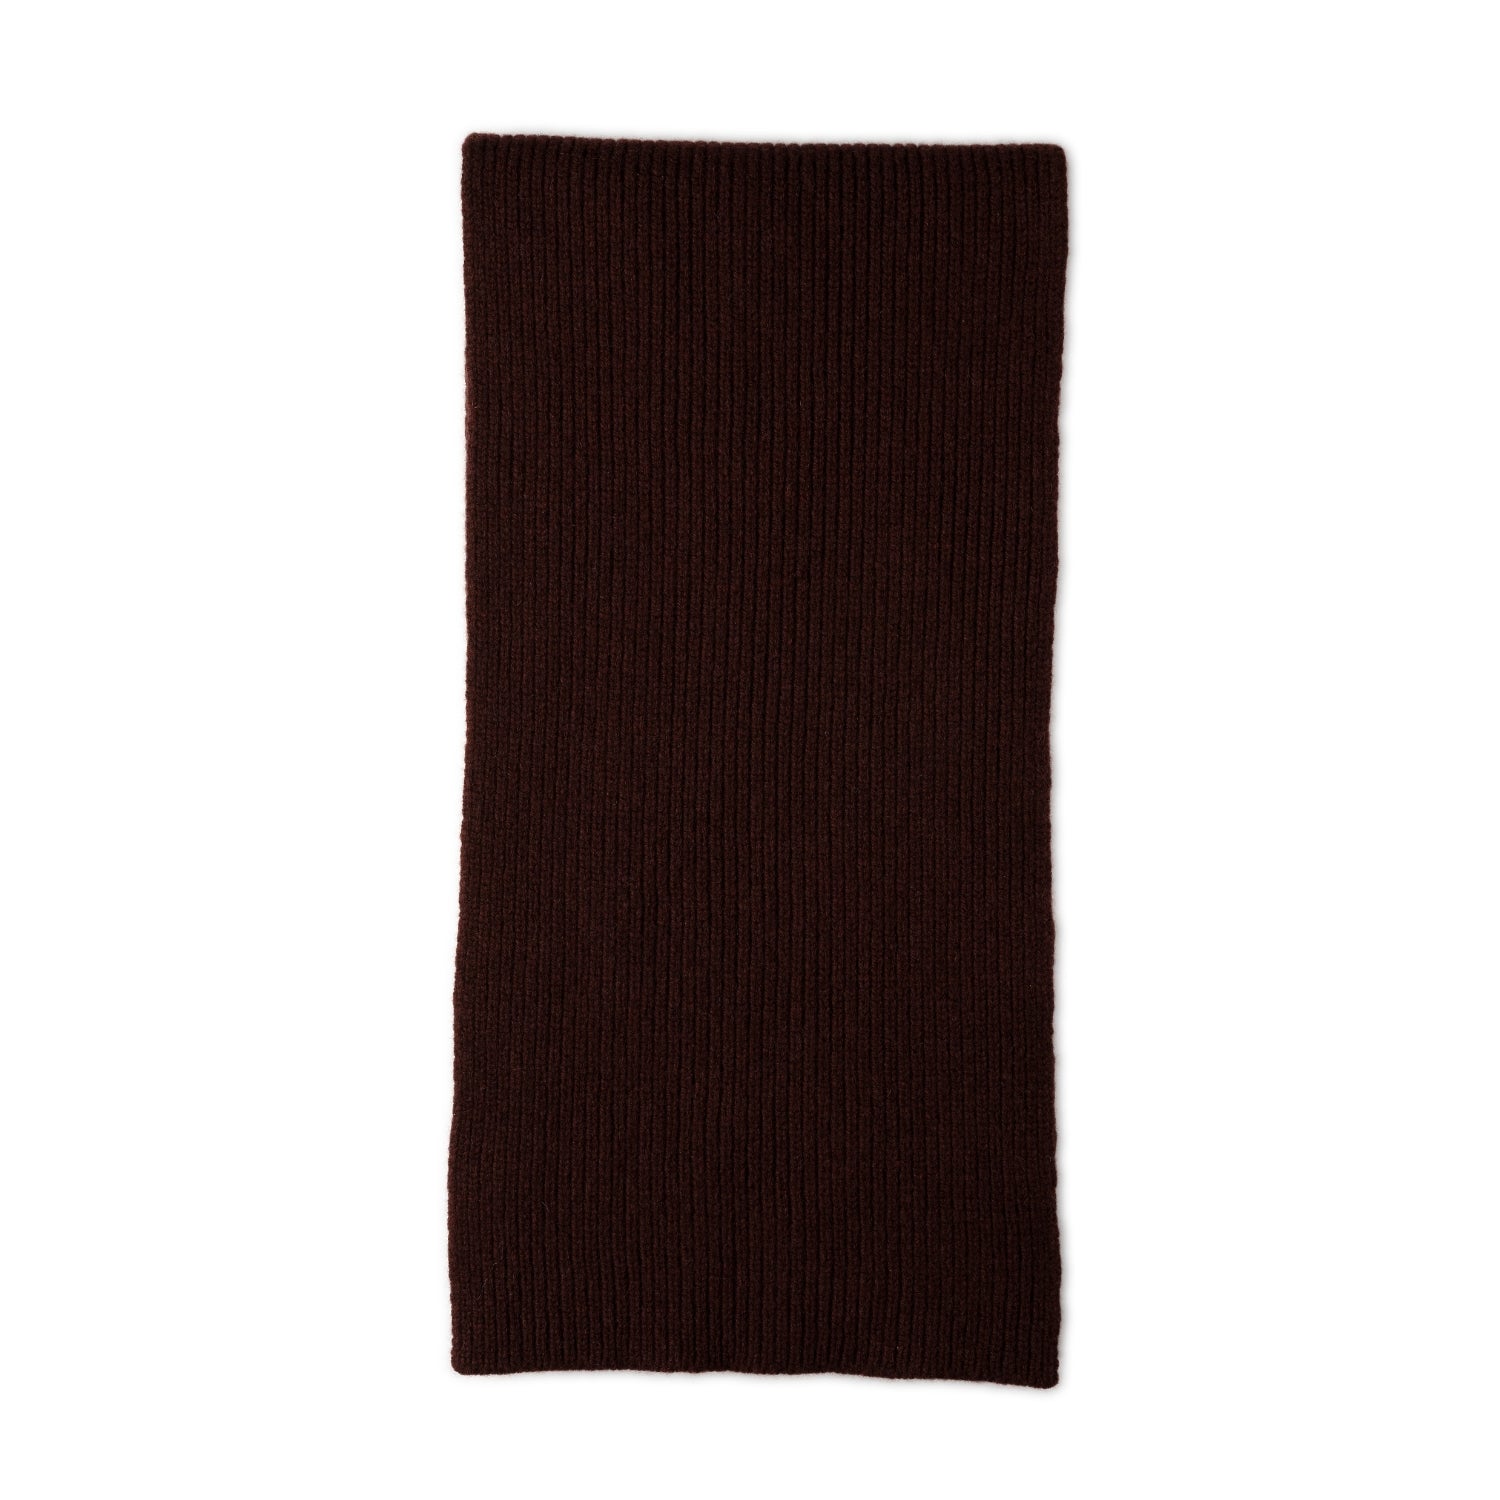 Ribbed wool scarf - chocoalte brown